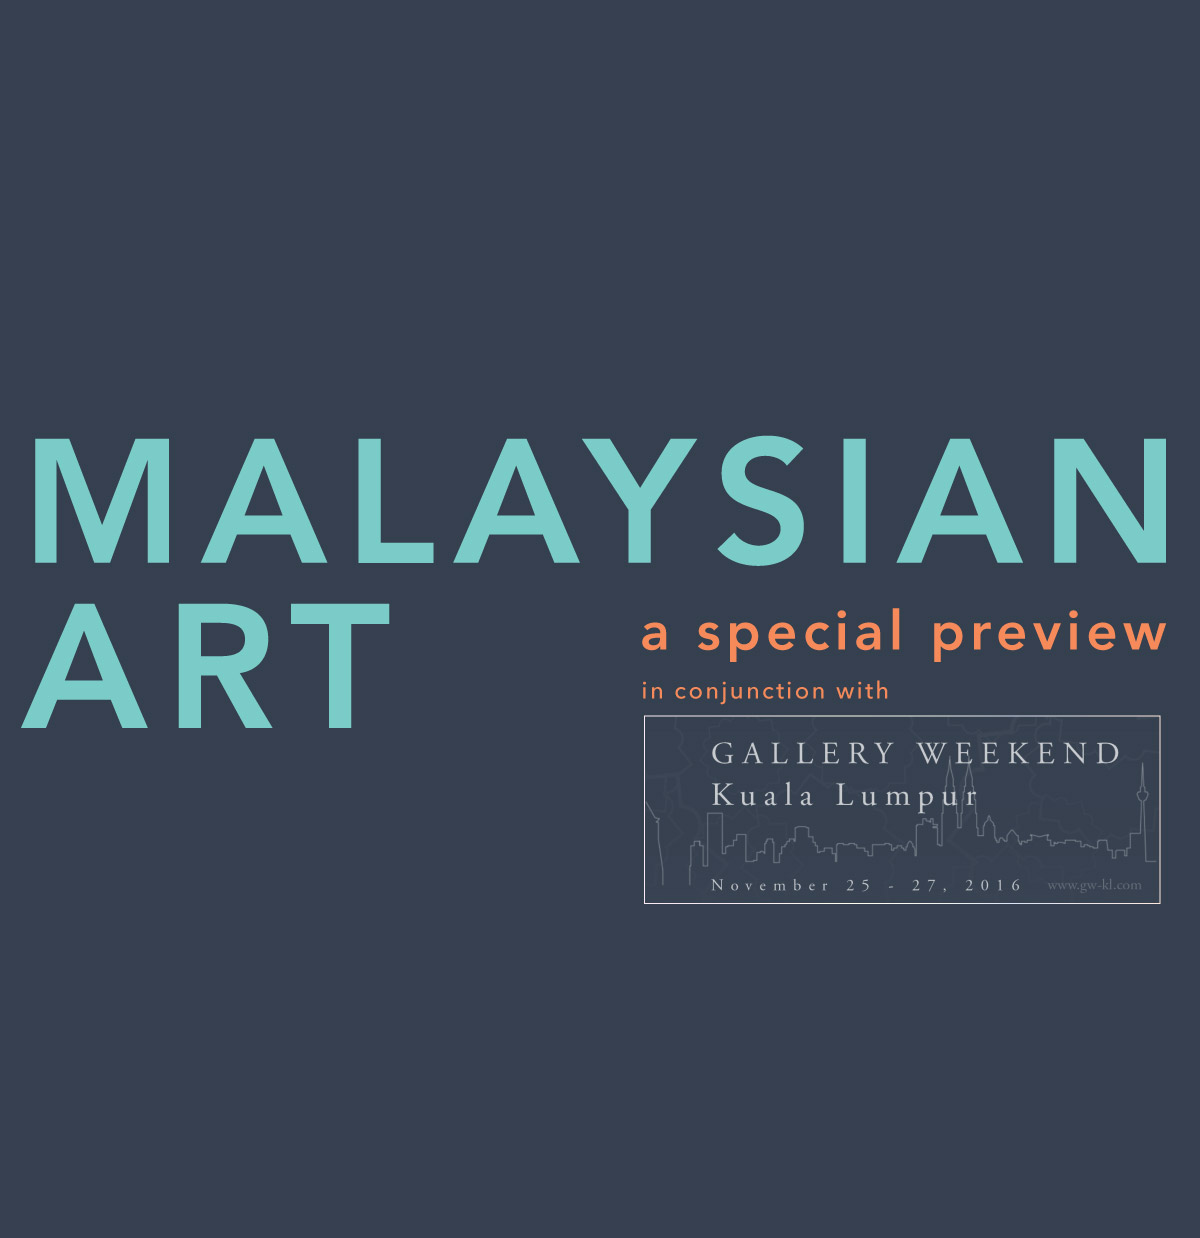   Malaysian Art, A Special Preview